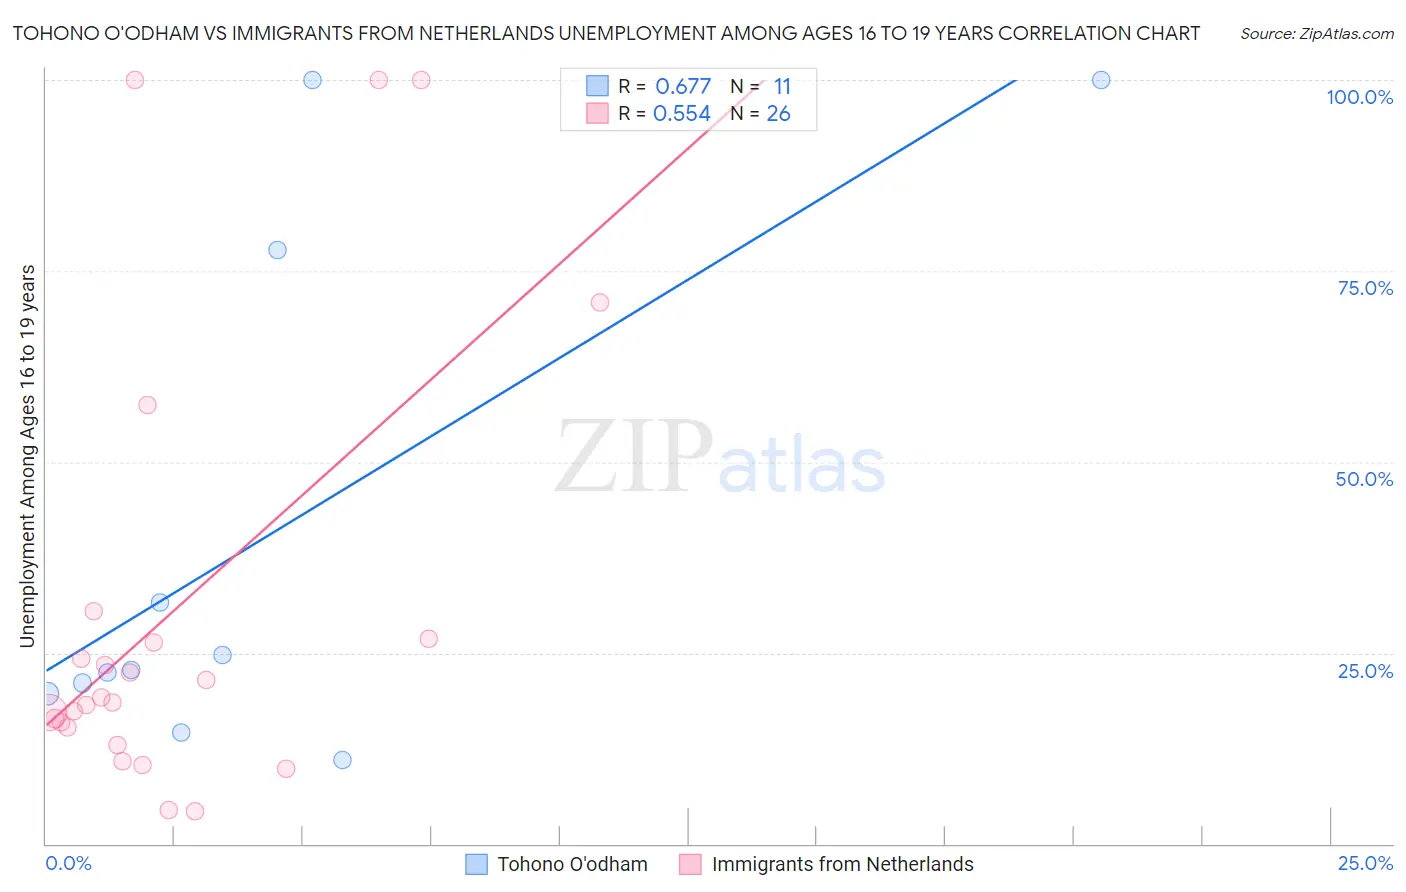 Tohono O'odham vs Immigrants from Netherlands Unemployment Among Ages 16 to 19 years